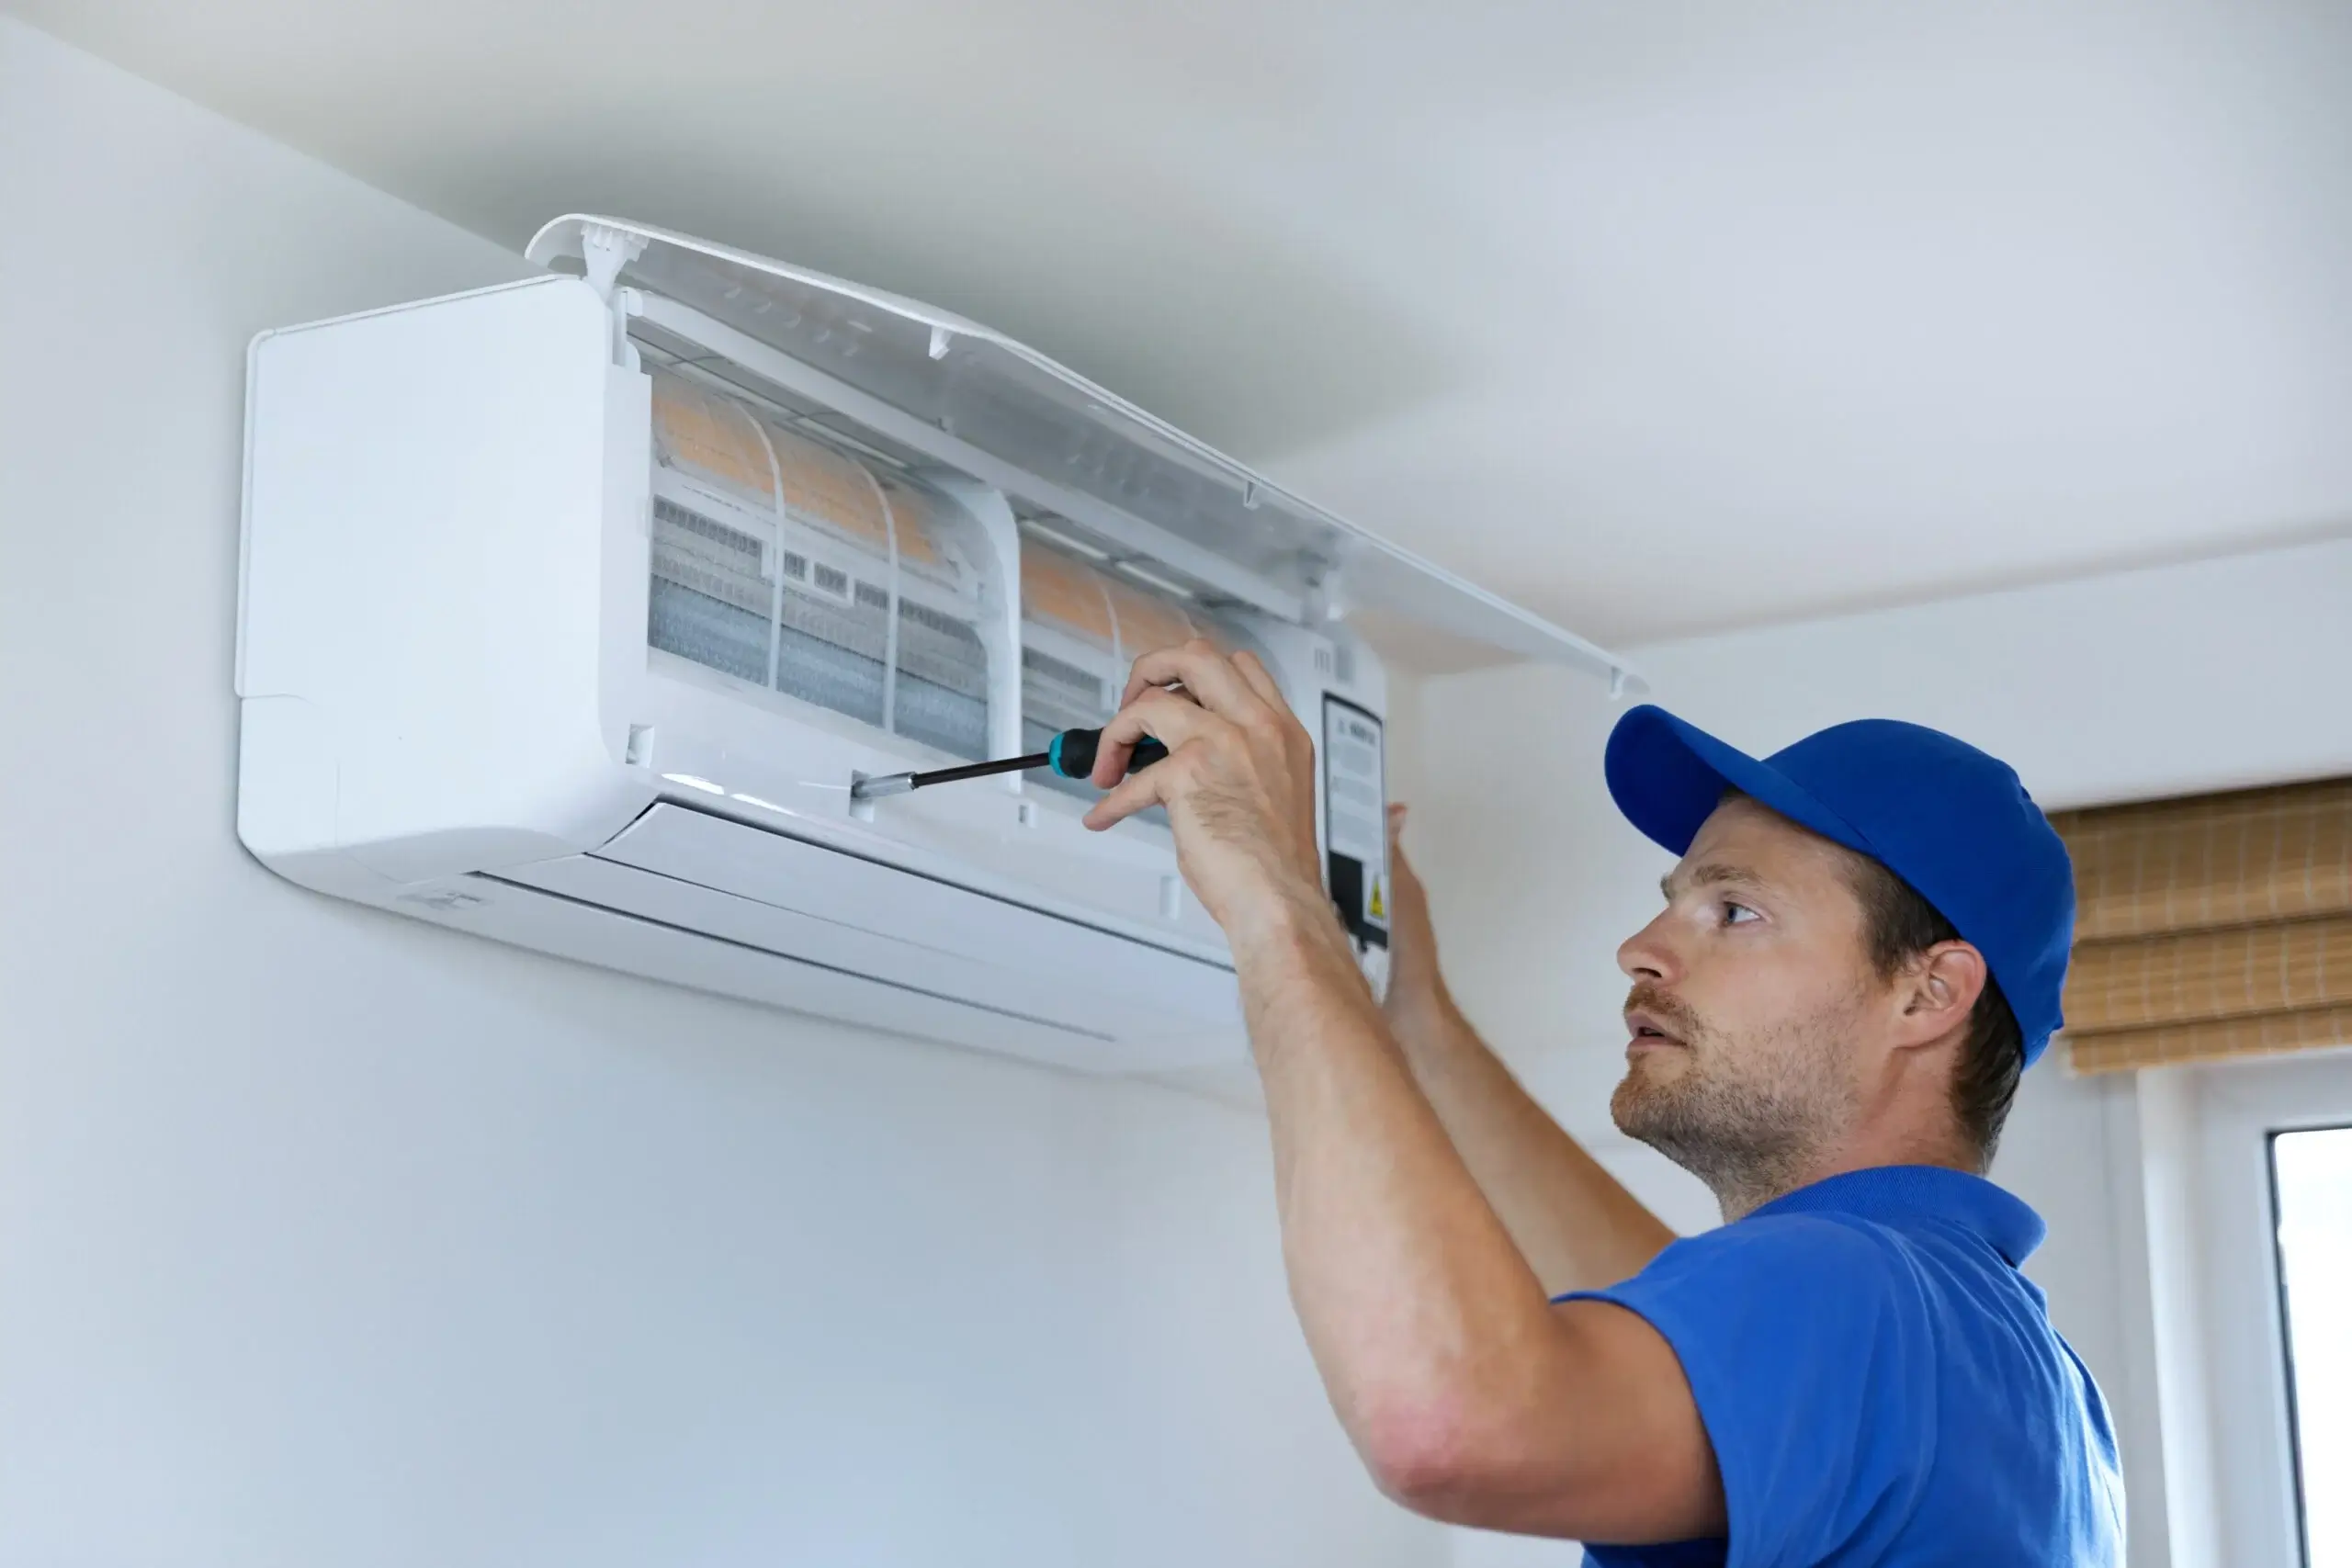 Find a Trusted Hvac System Provider